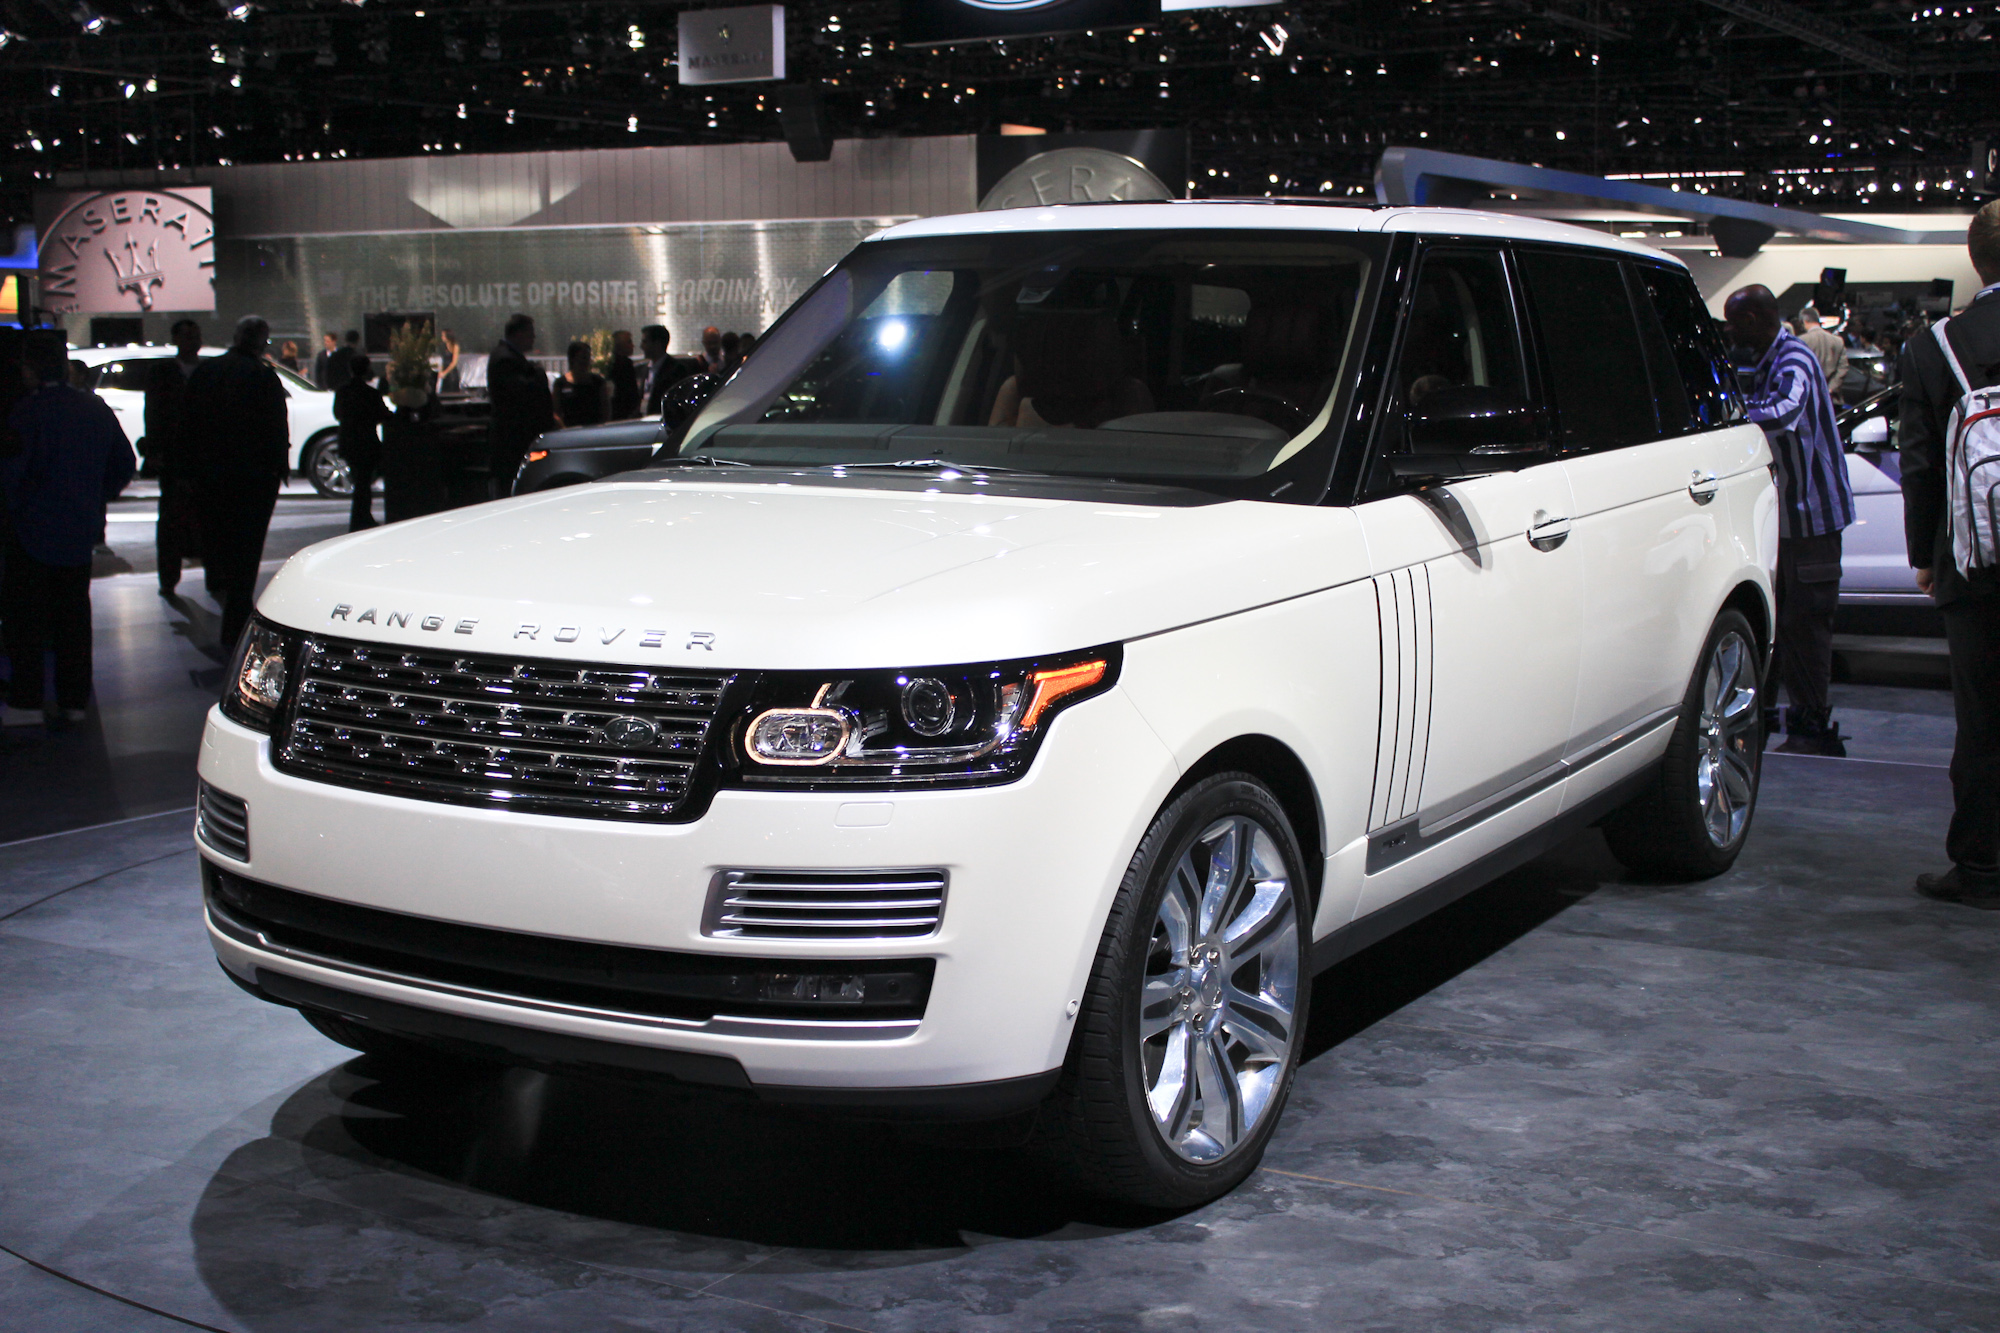 Range Rover Inside Black  . Connectivity And Entertainment At The Very Highest Level.